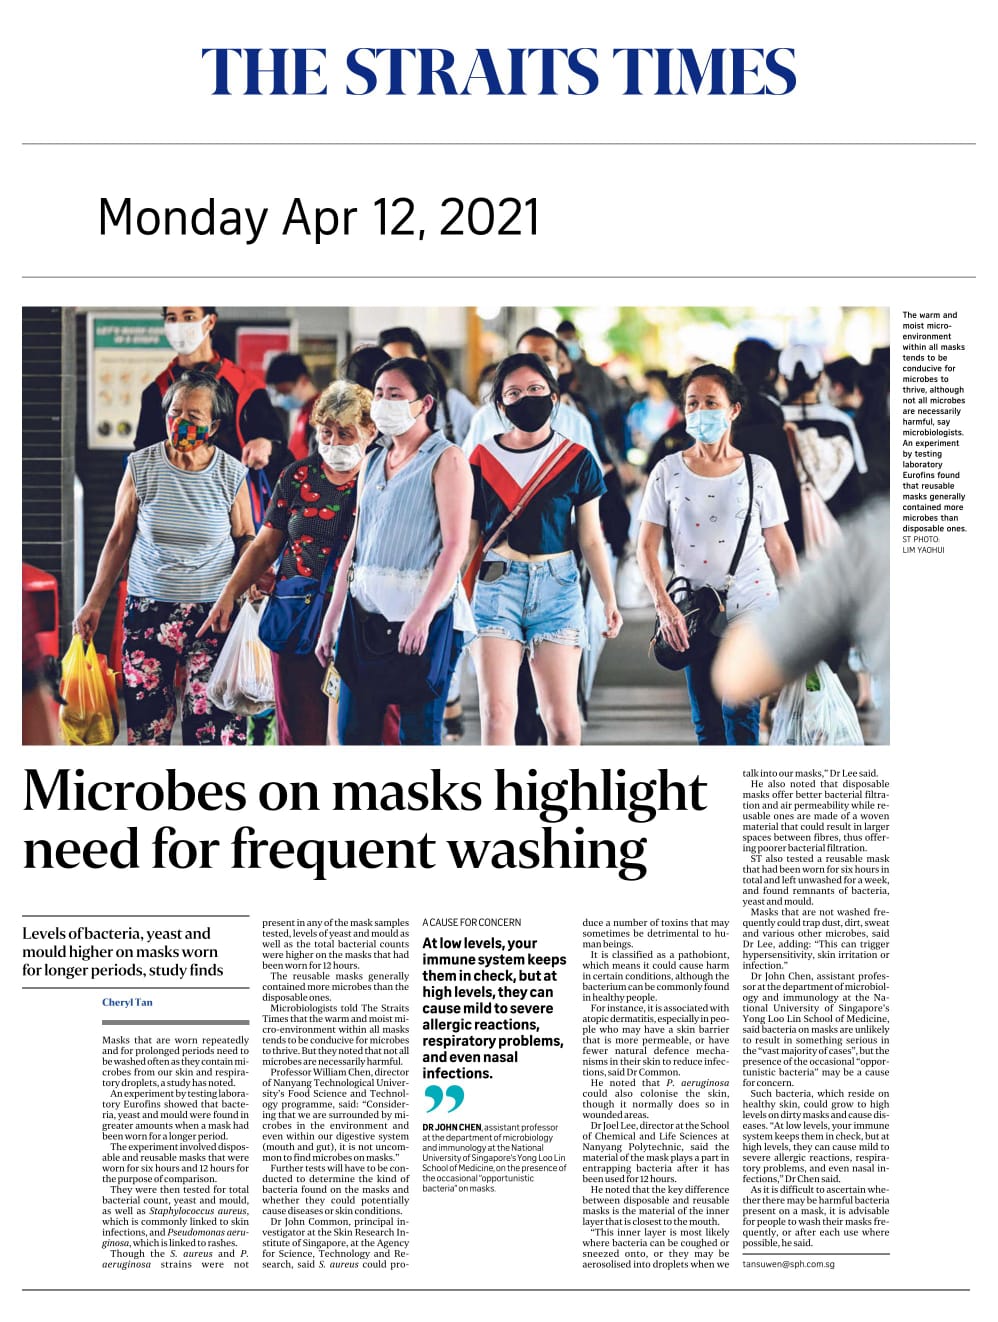 Microbes on masks highlight need for frequent washing - Published in The Straits Times April 12, 2021